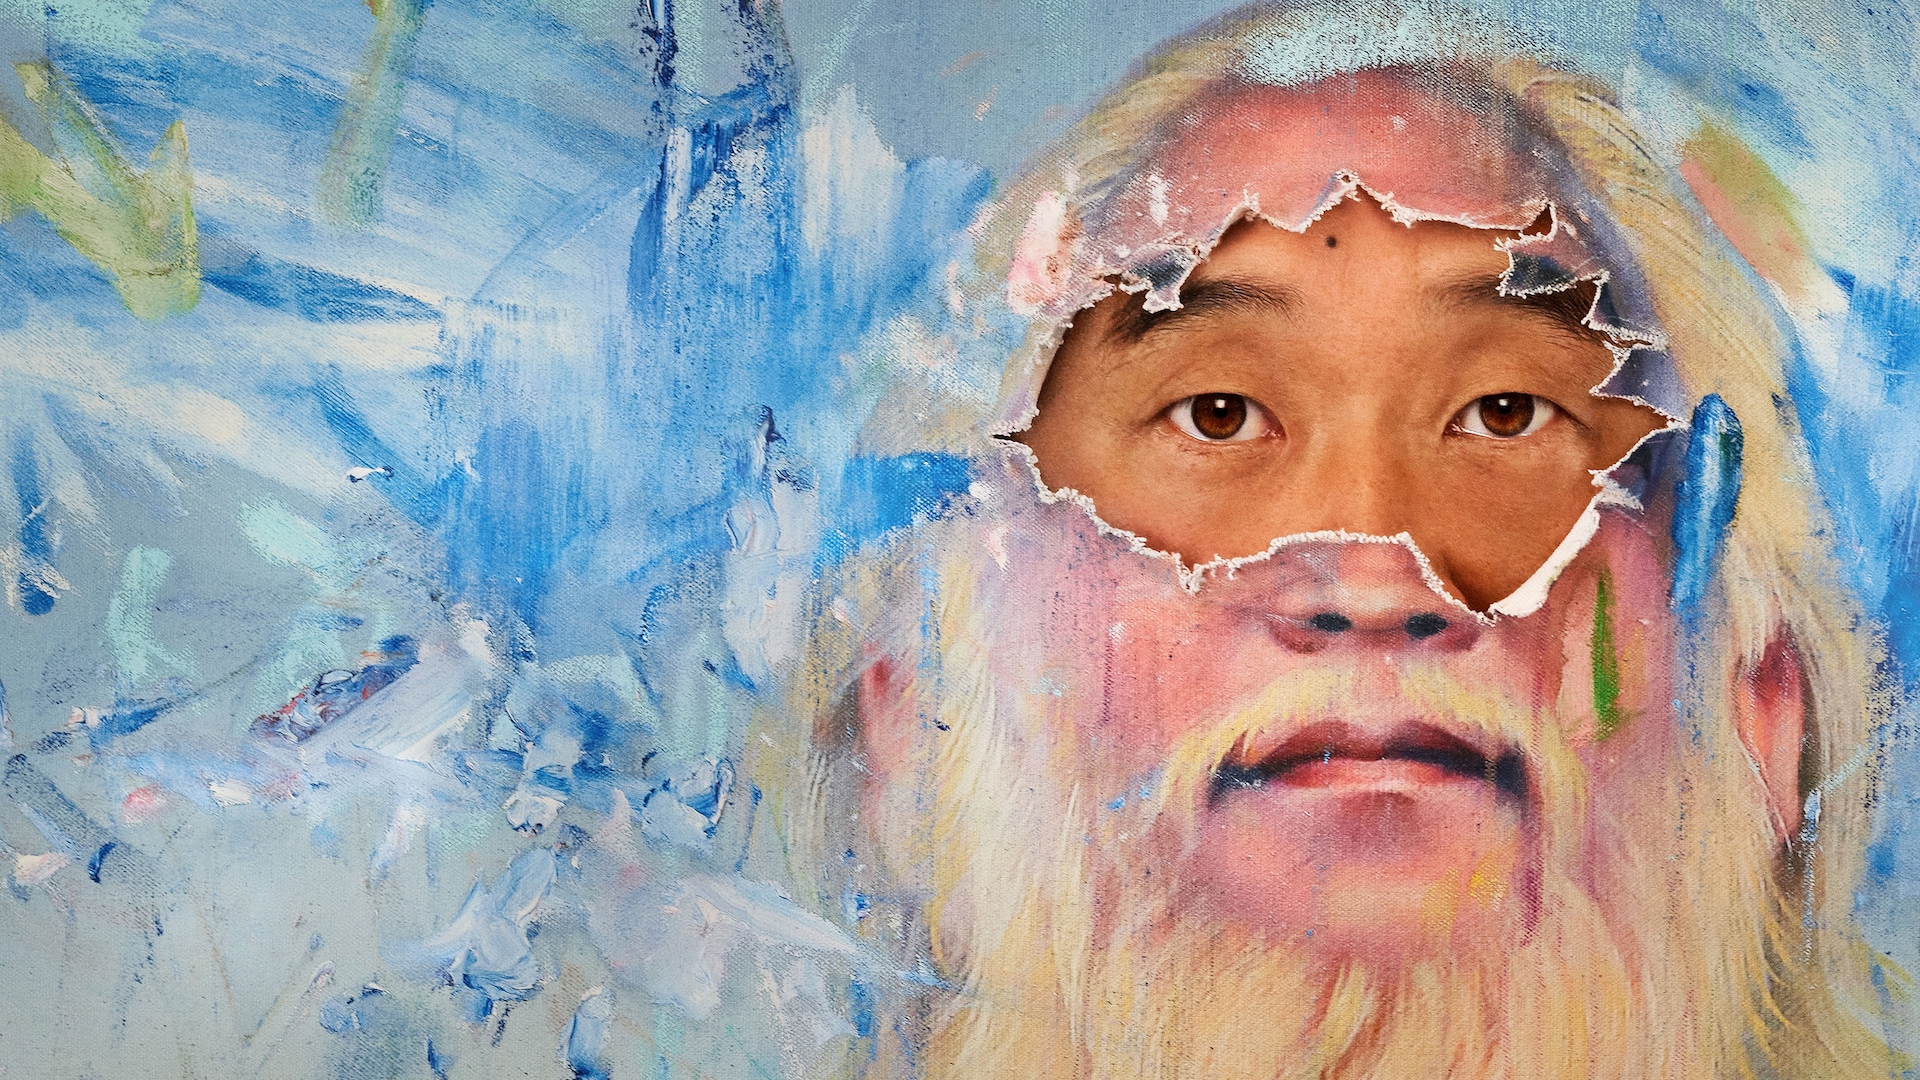 Painting of David Choe with white beard and hair torn over eyes with younger self peering through for The Choe Show